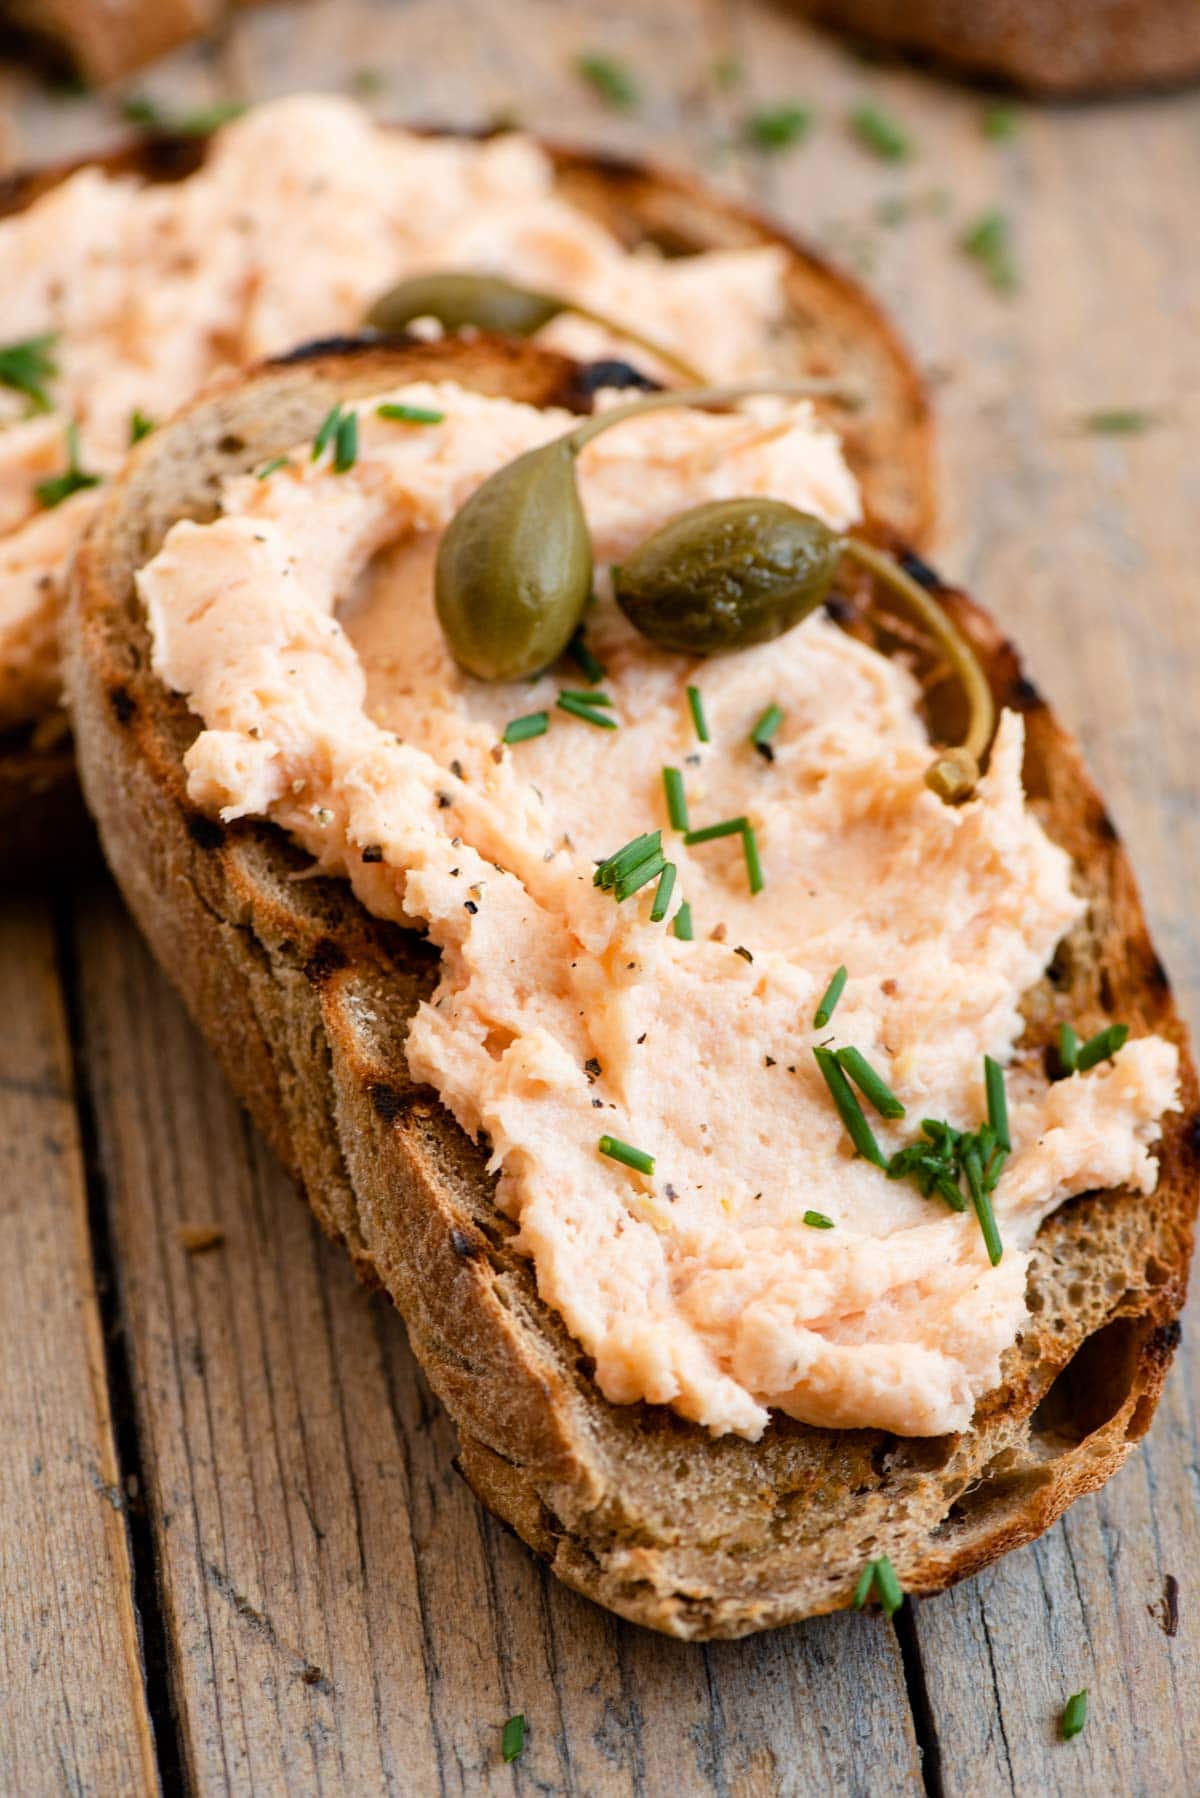 A close up of a slice of bread topped with smoked salmon pate, chives and capers.